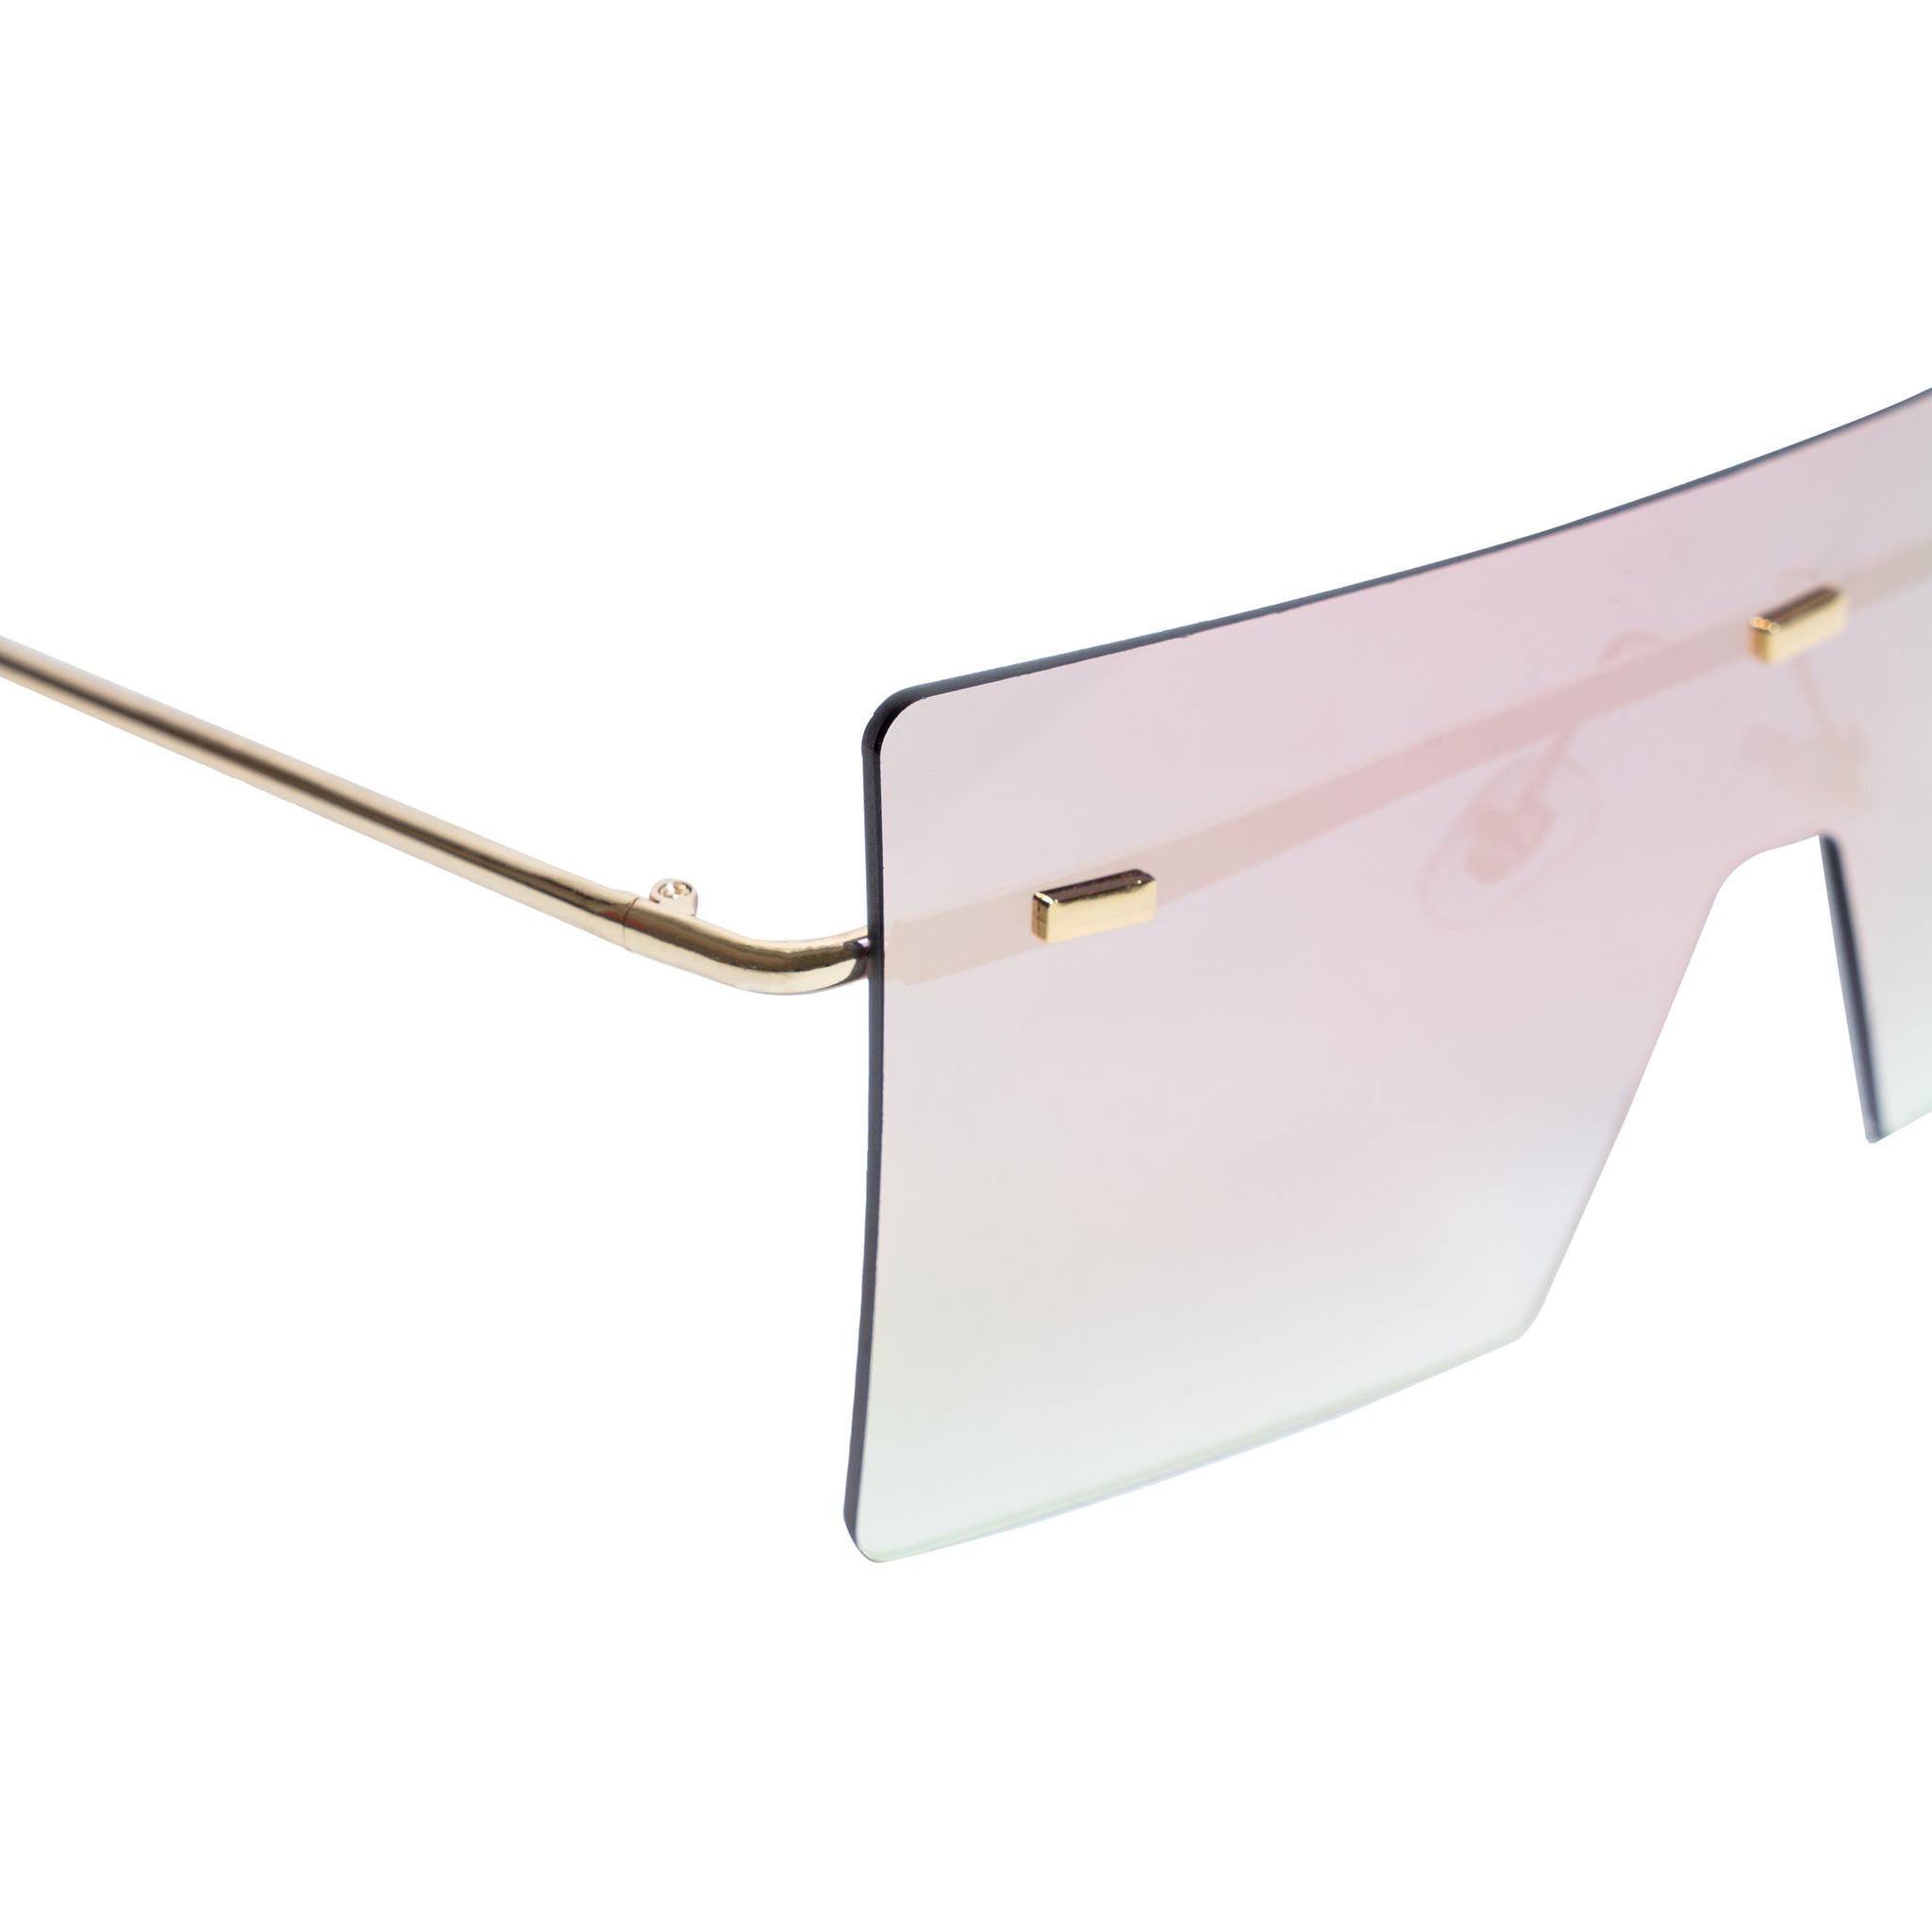 Chokore Rimless Oversized Sunglasses with UV 400 Protection (Pink)